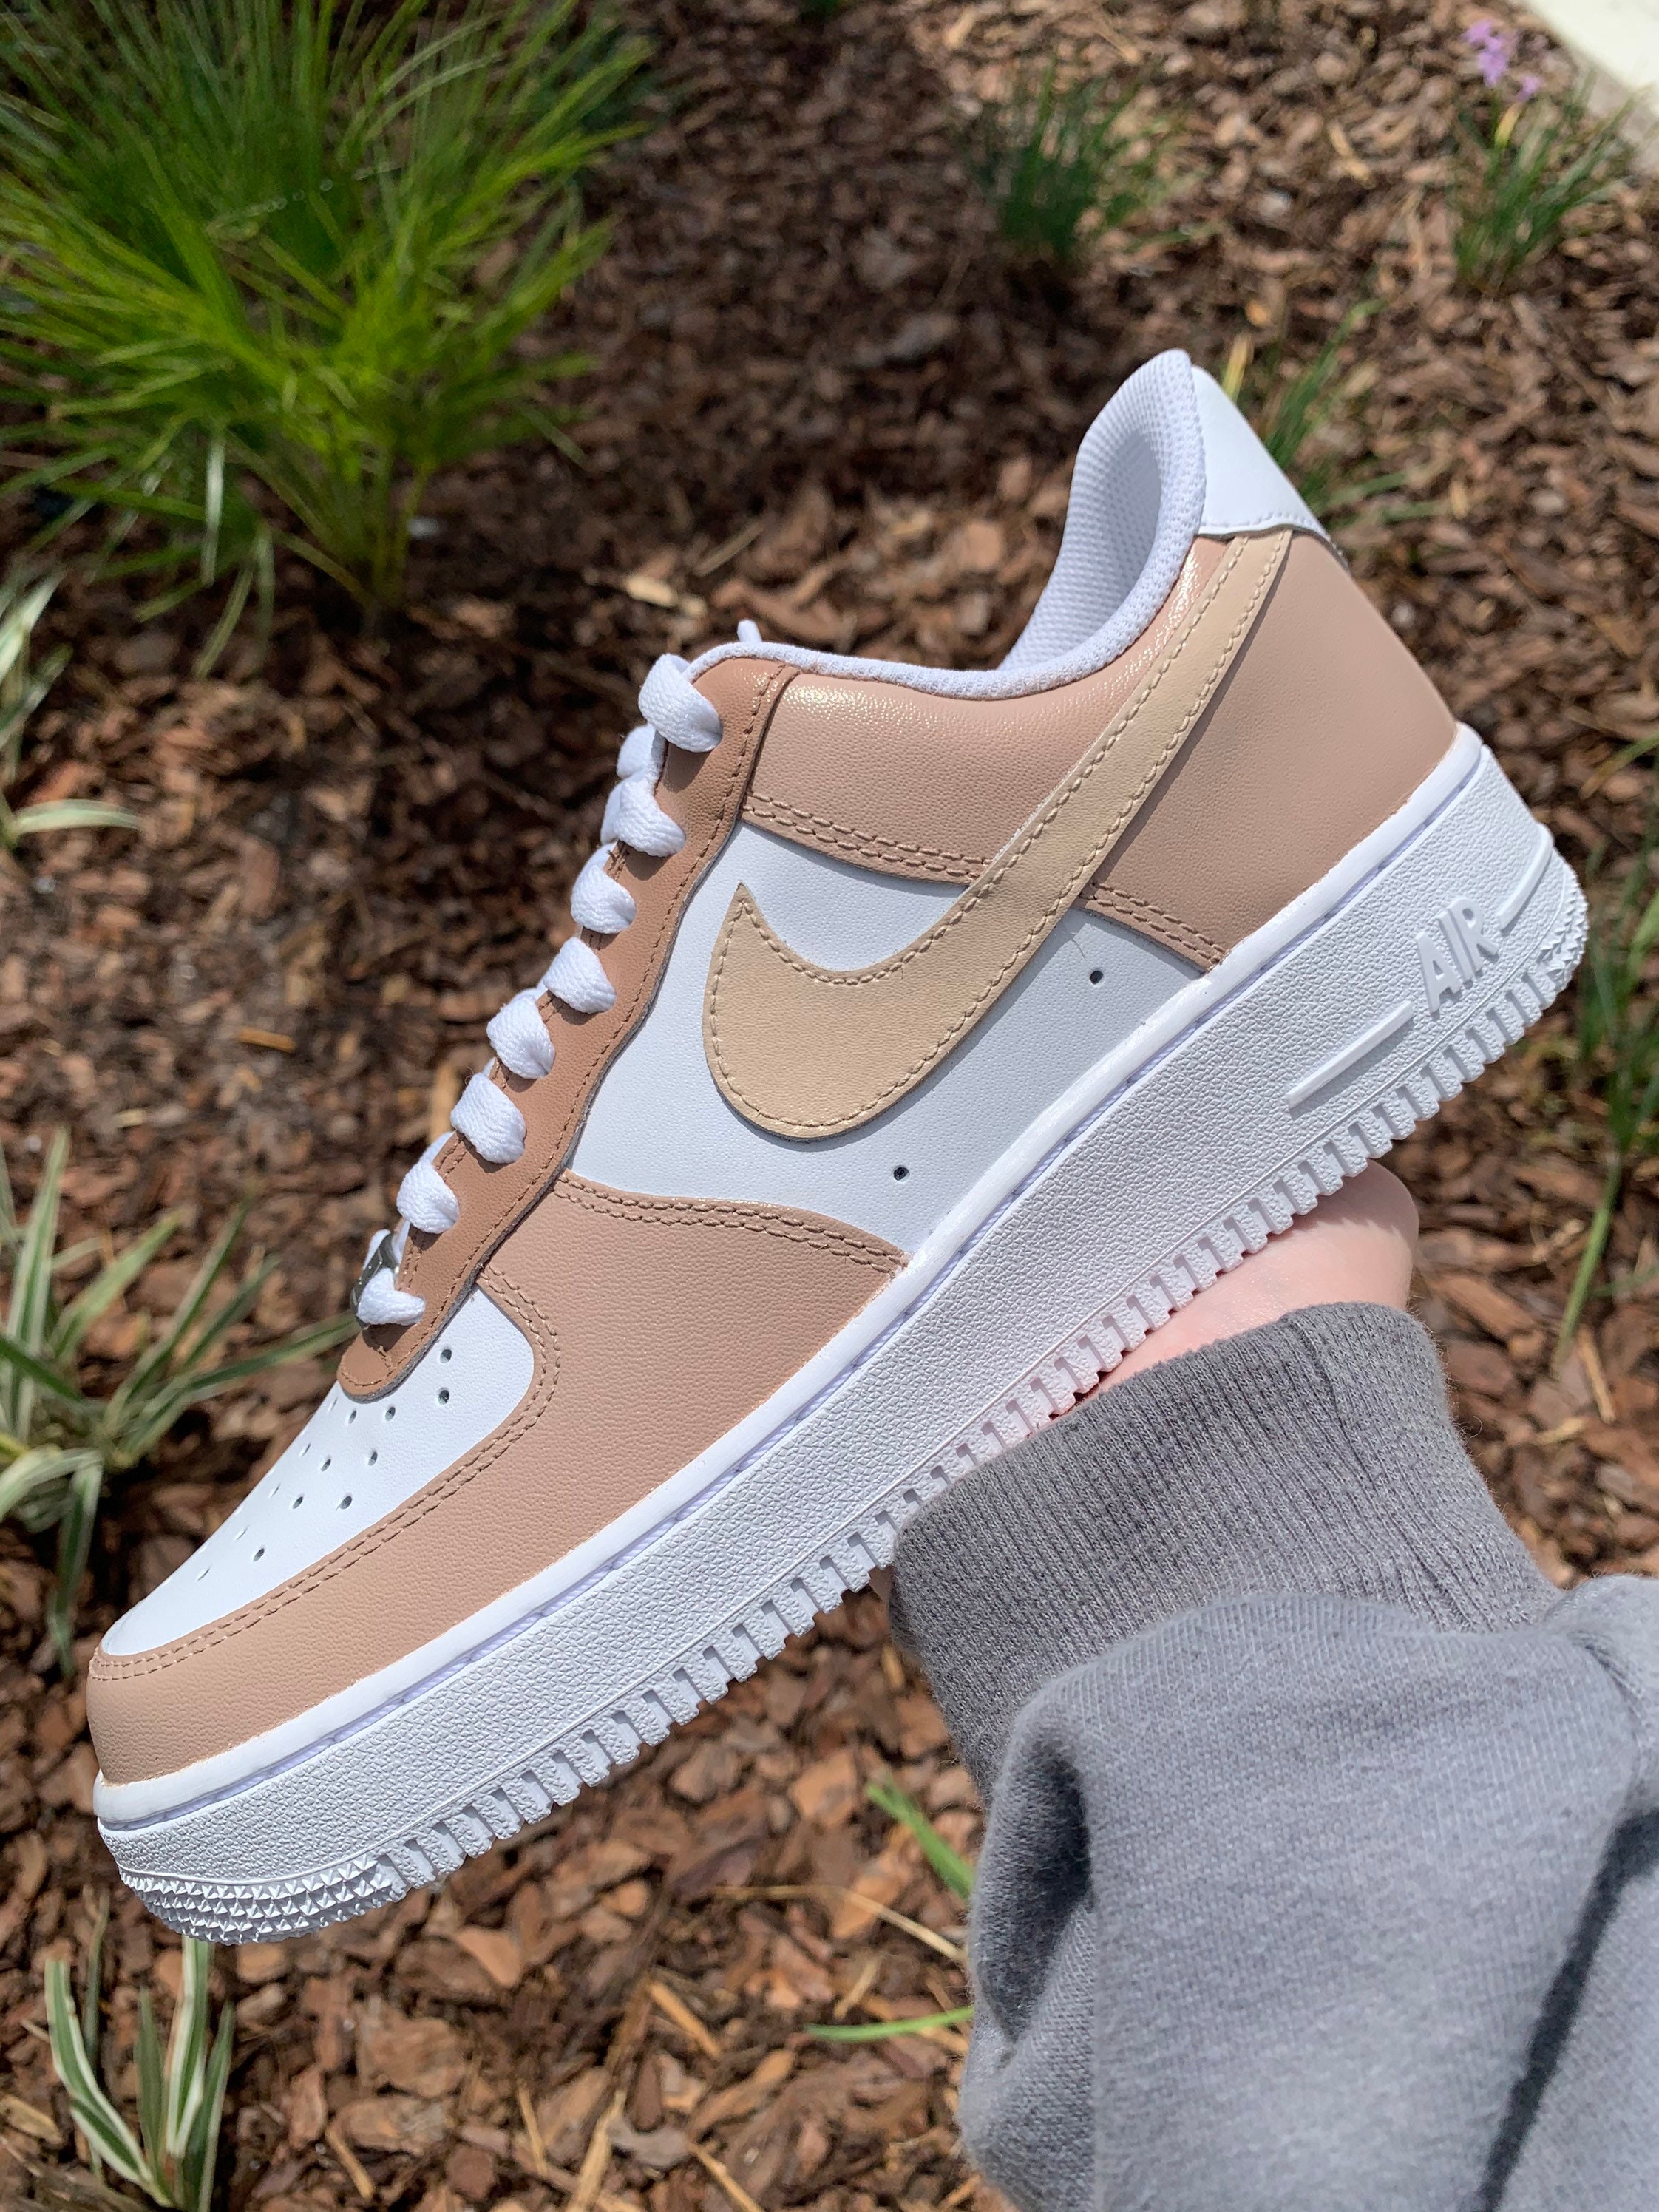 brown leather air force 1